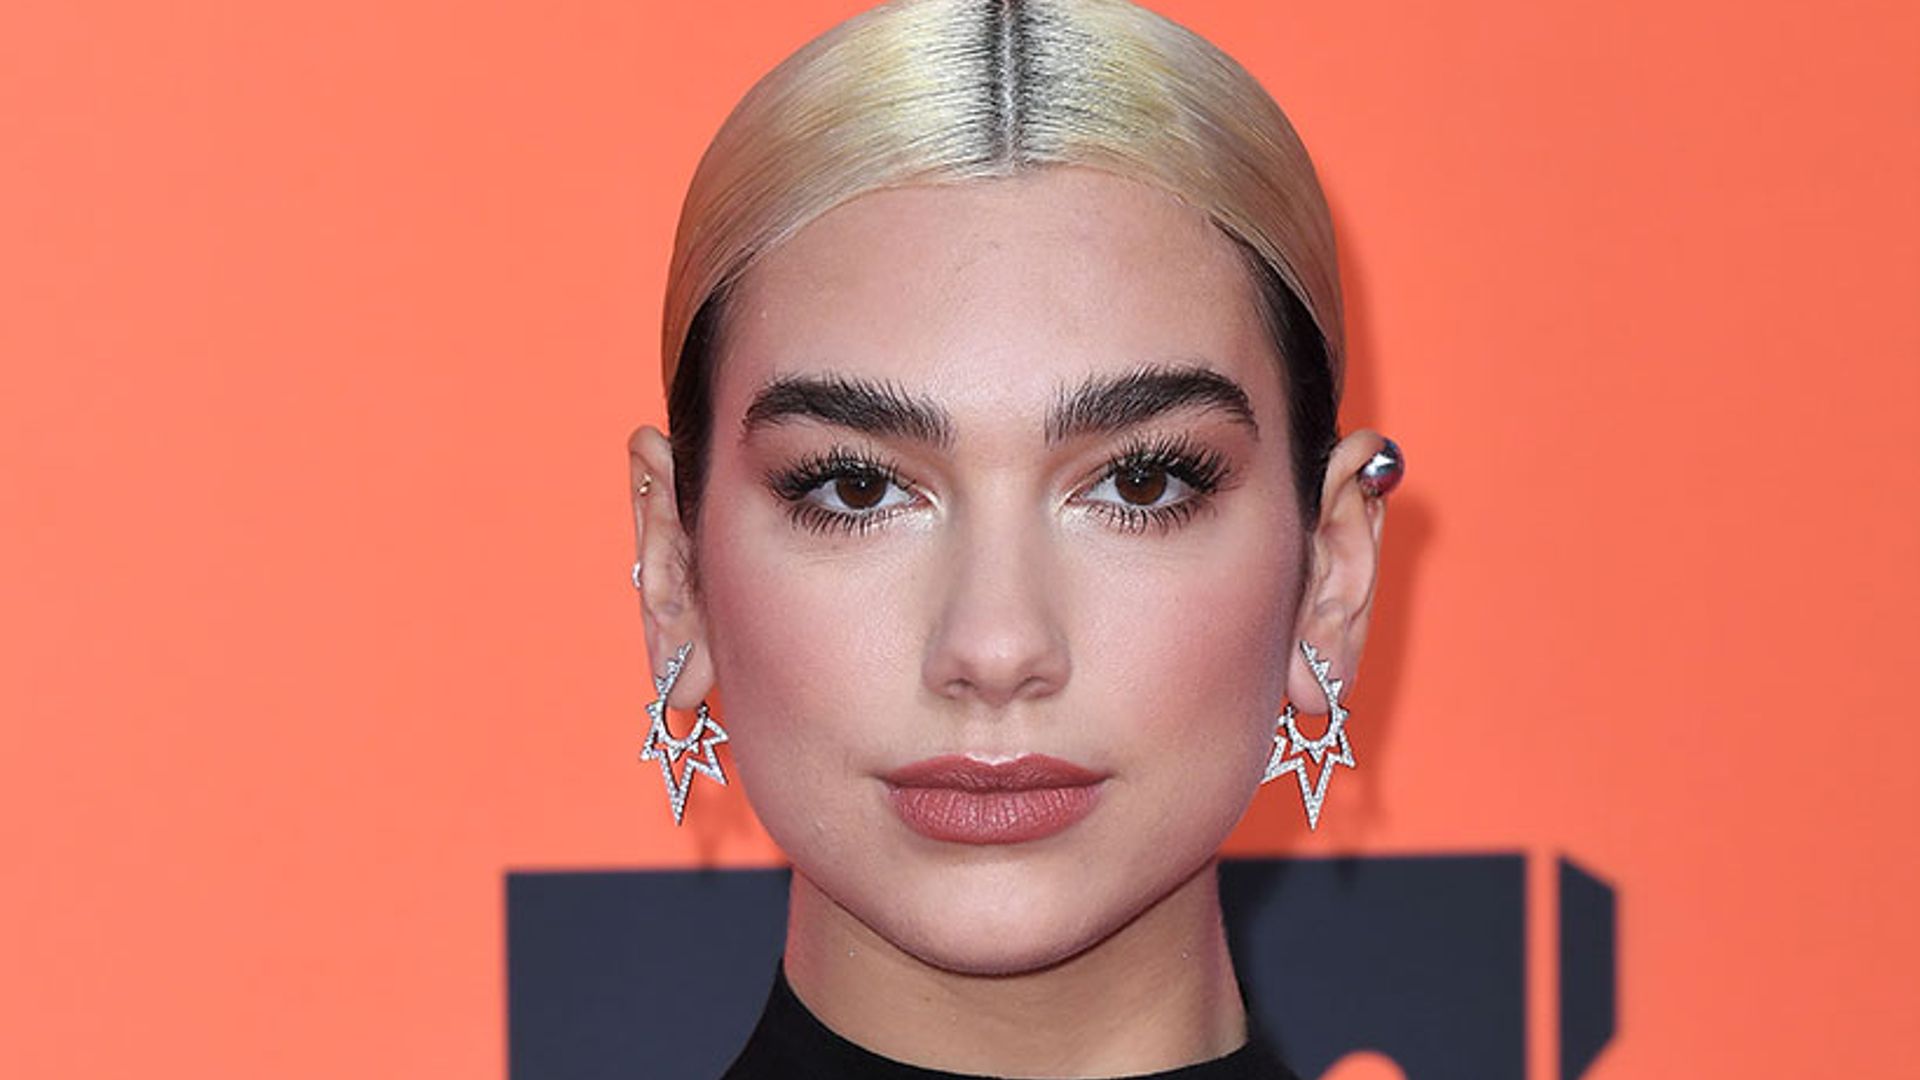 Dua Lipa calls for an end to online trolling and says that we all need to be nicer to one another